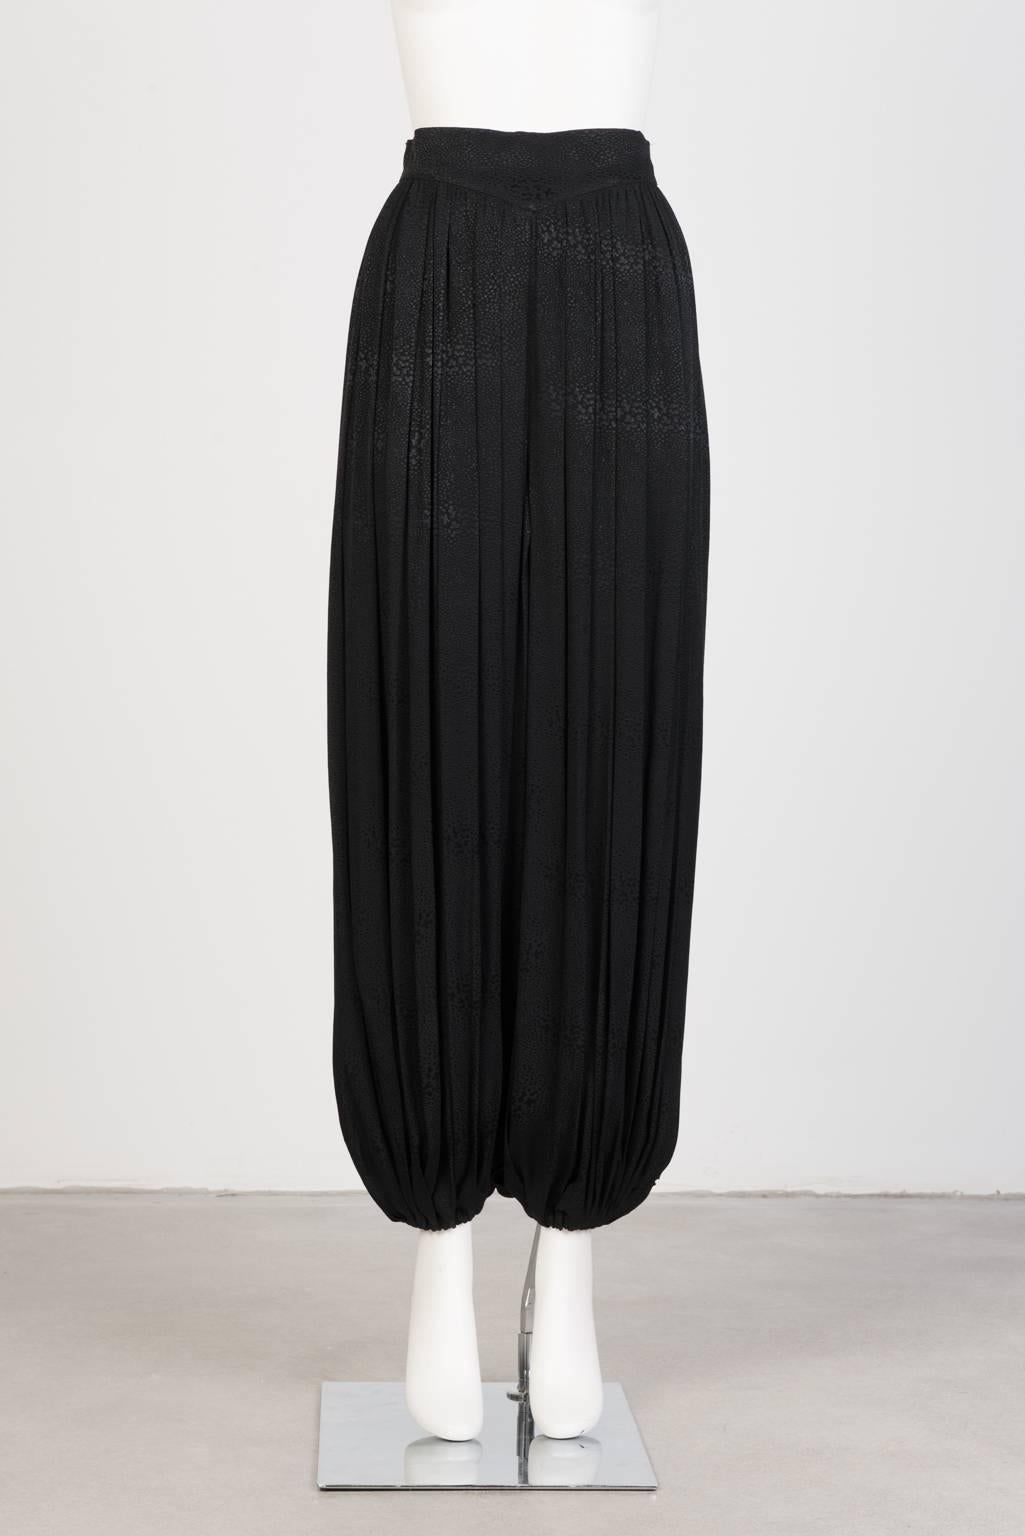 Black harem pants with gathered cuff and zip closure in finely pleated, subtly printed, jacquard.